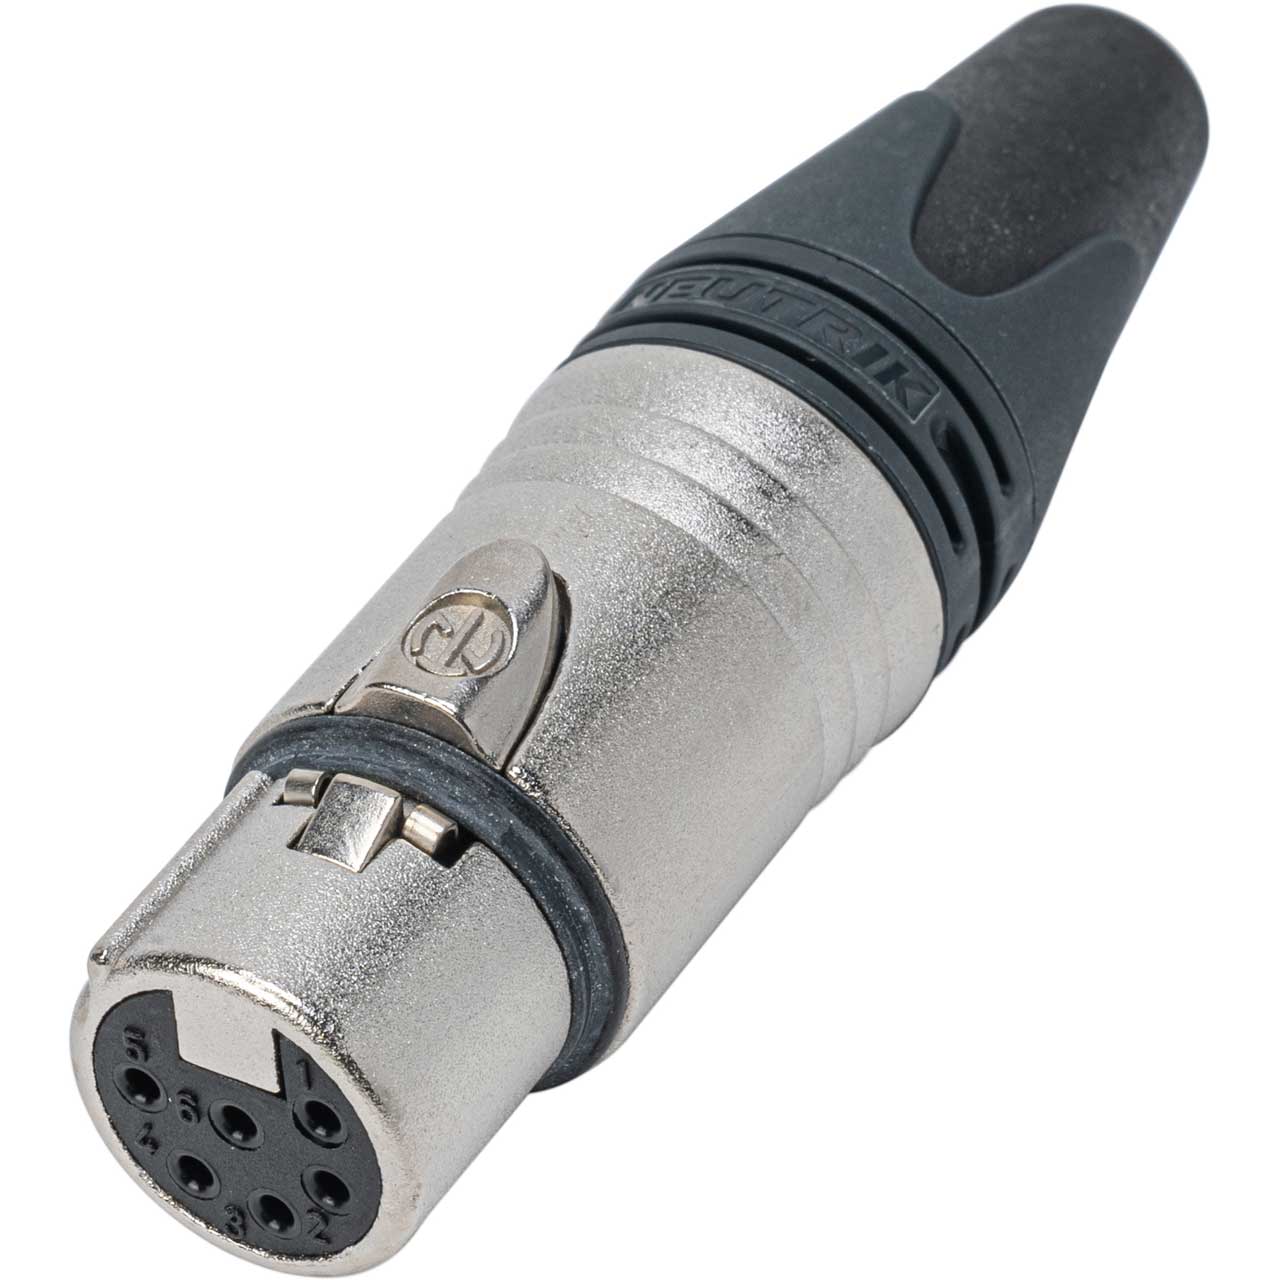 Housing　XLR　Silver　with　and　Cable　Pole　Nickel　NC6FXX　Neutrik　Connector　Female　Contacts